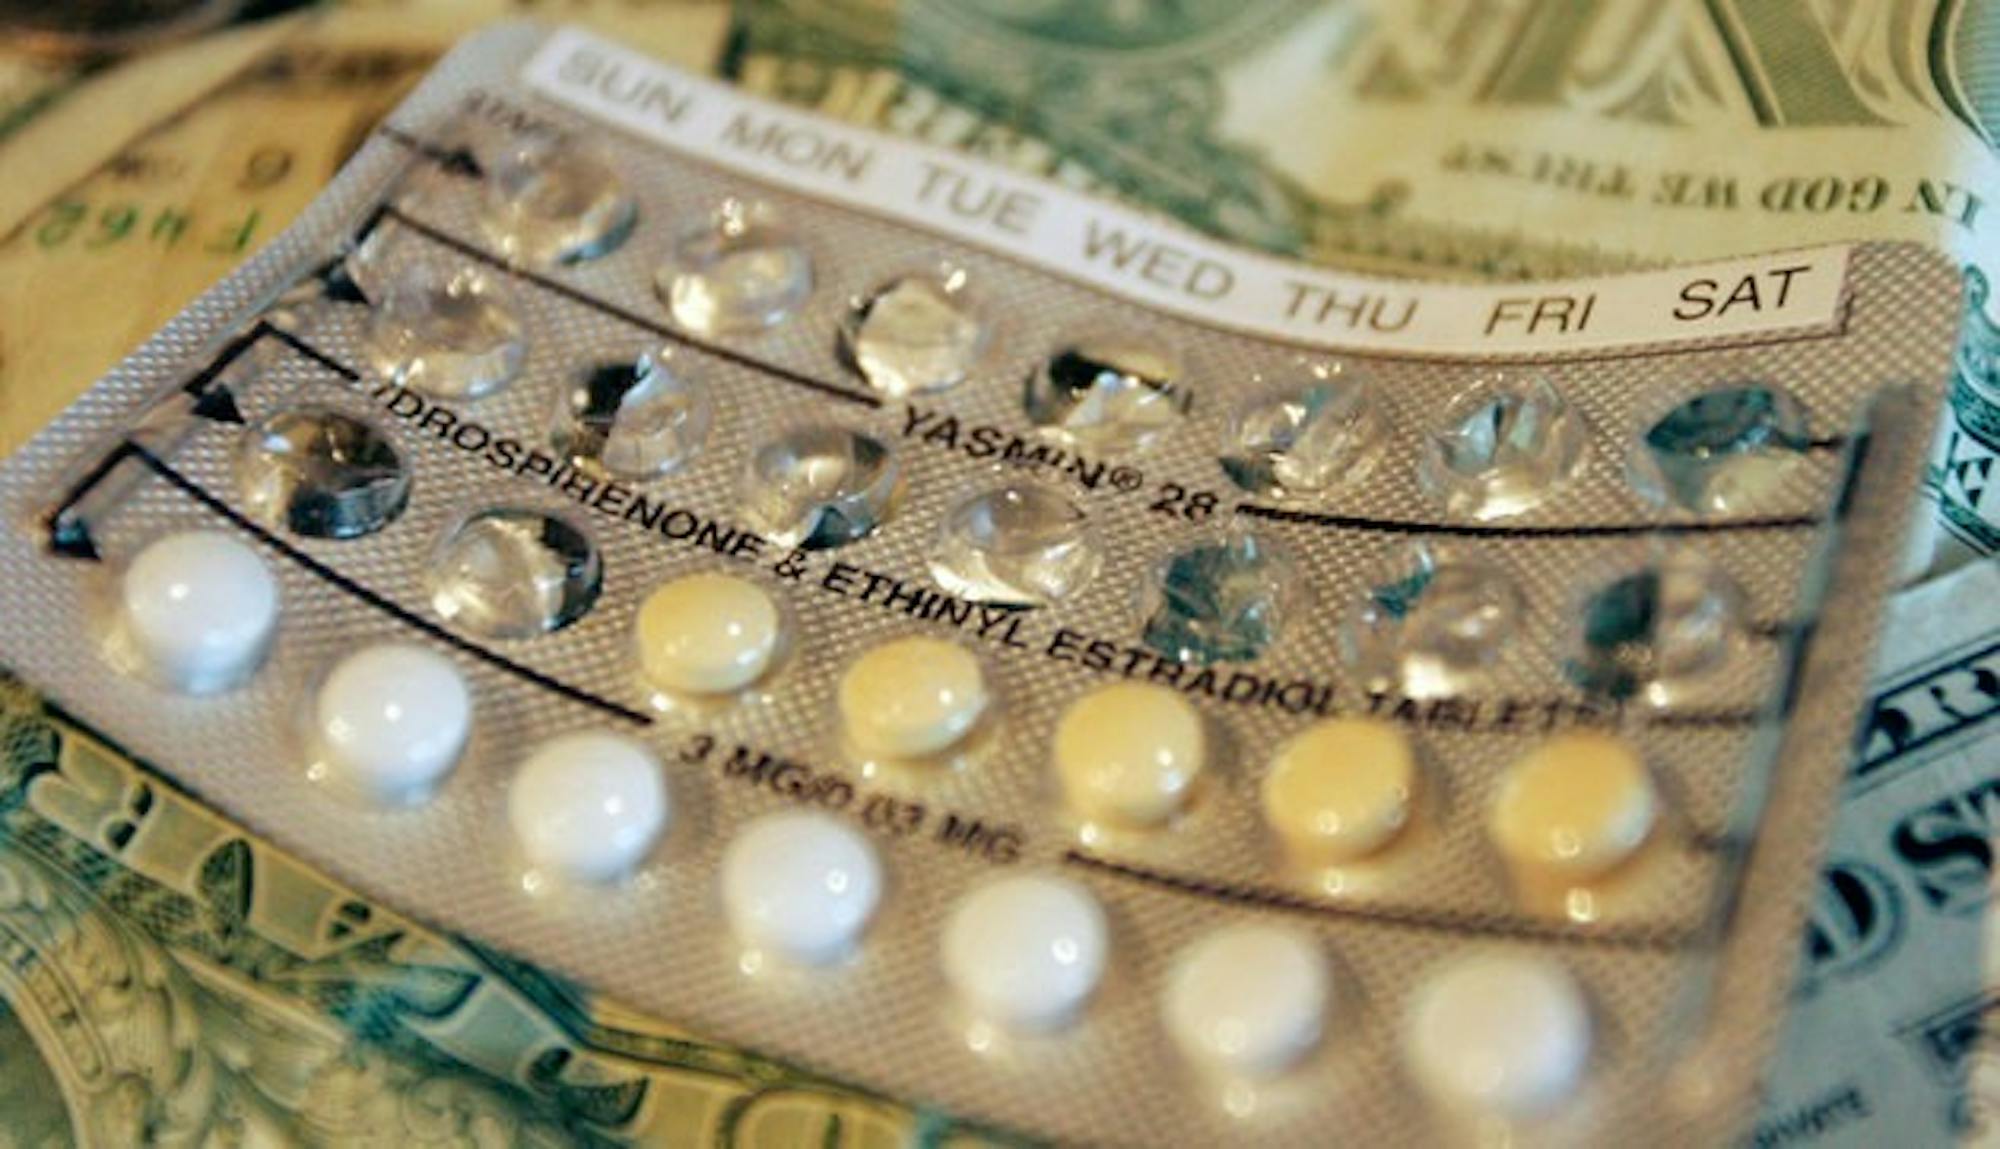 Despite rising costs of birth control on college campuses due to the Deficit Reduction Act of 2005, Dartmouth still provides free birth control.